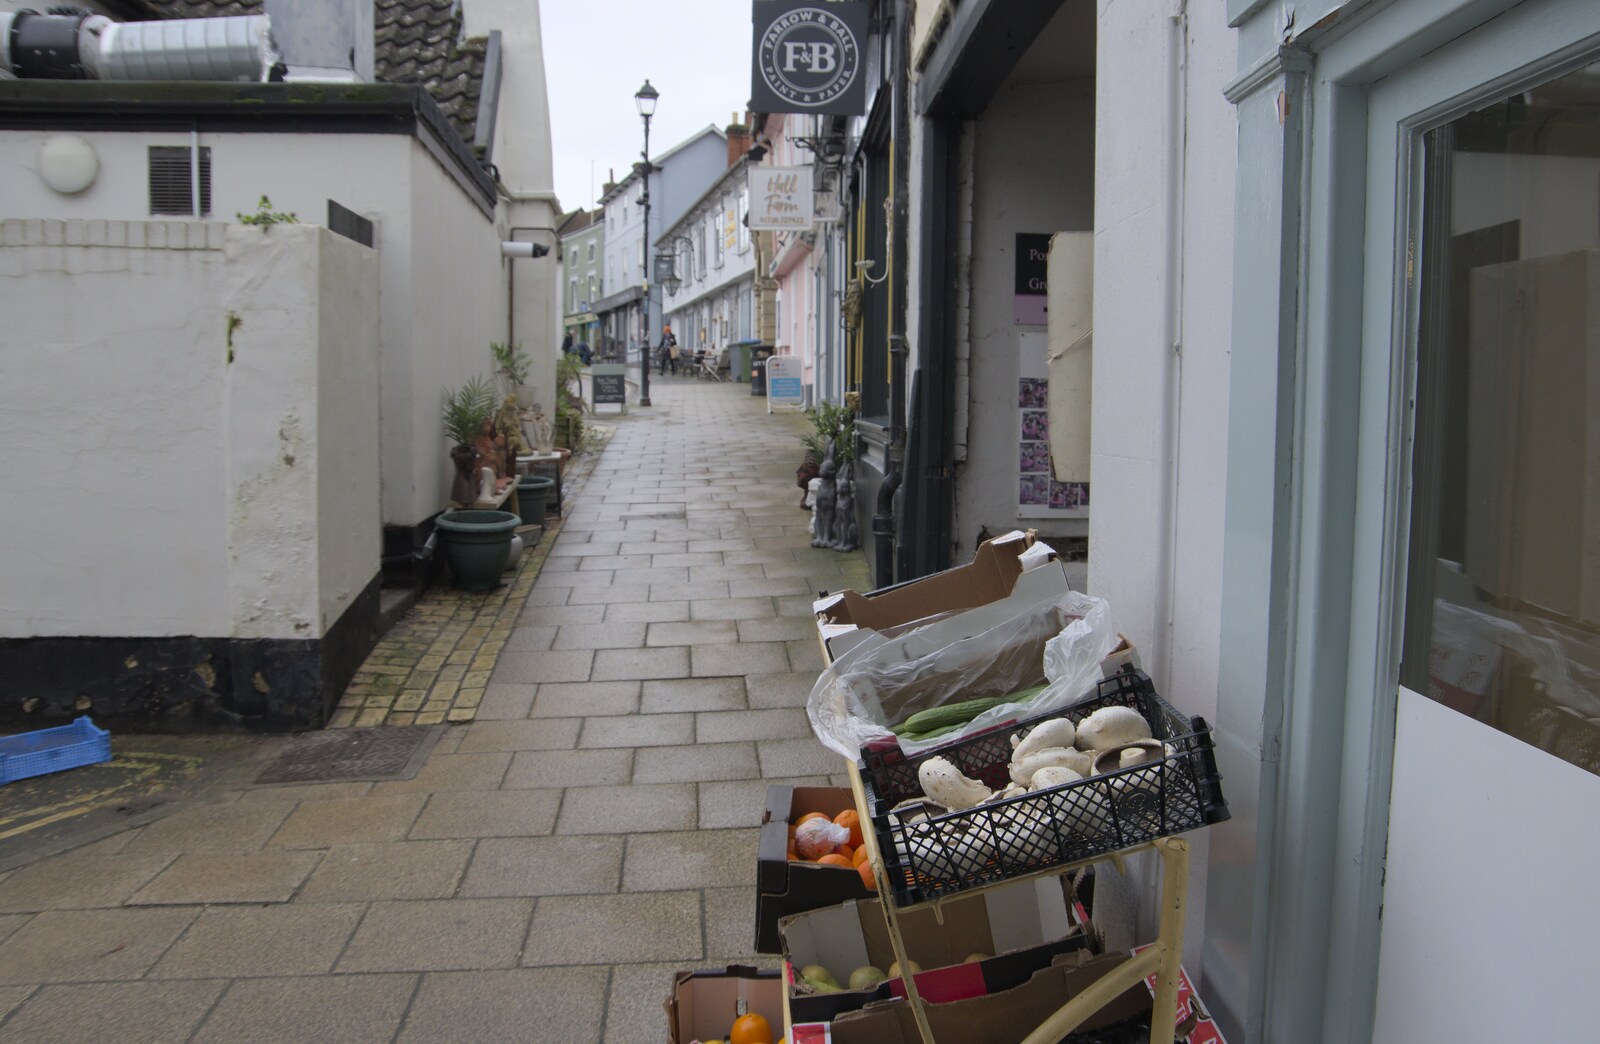 The alley from the market place from Framlingham, Aldeburgh and the USAAF Heritage Trust, Hoxne, Suffolk - 14th February 2024 